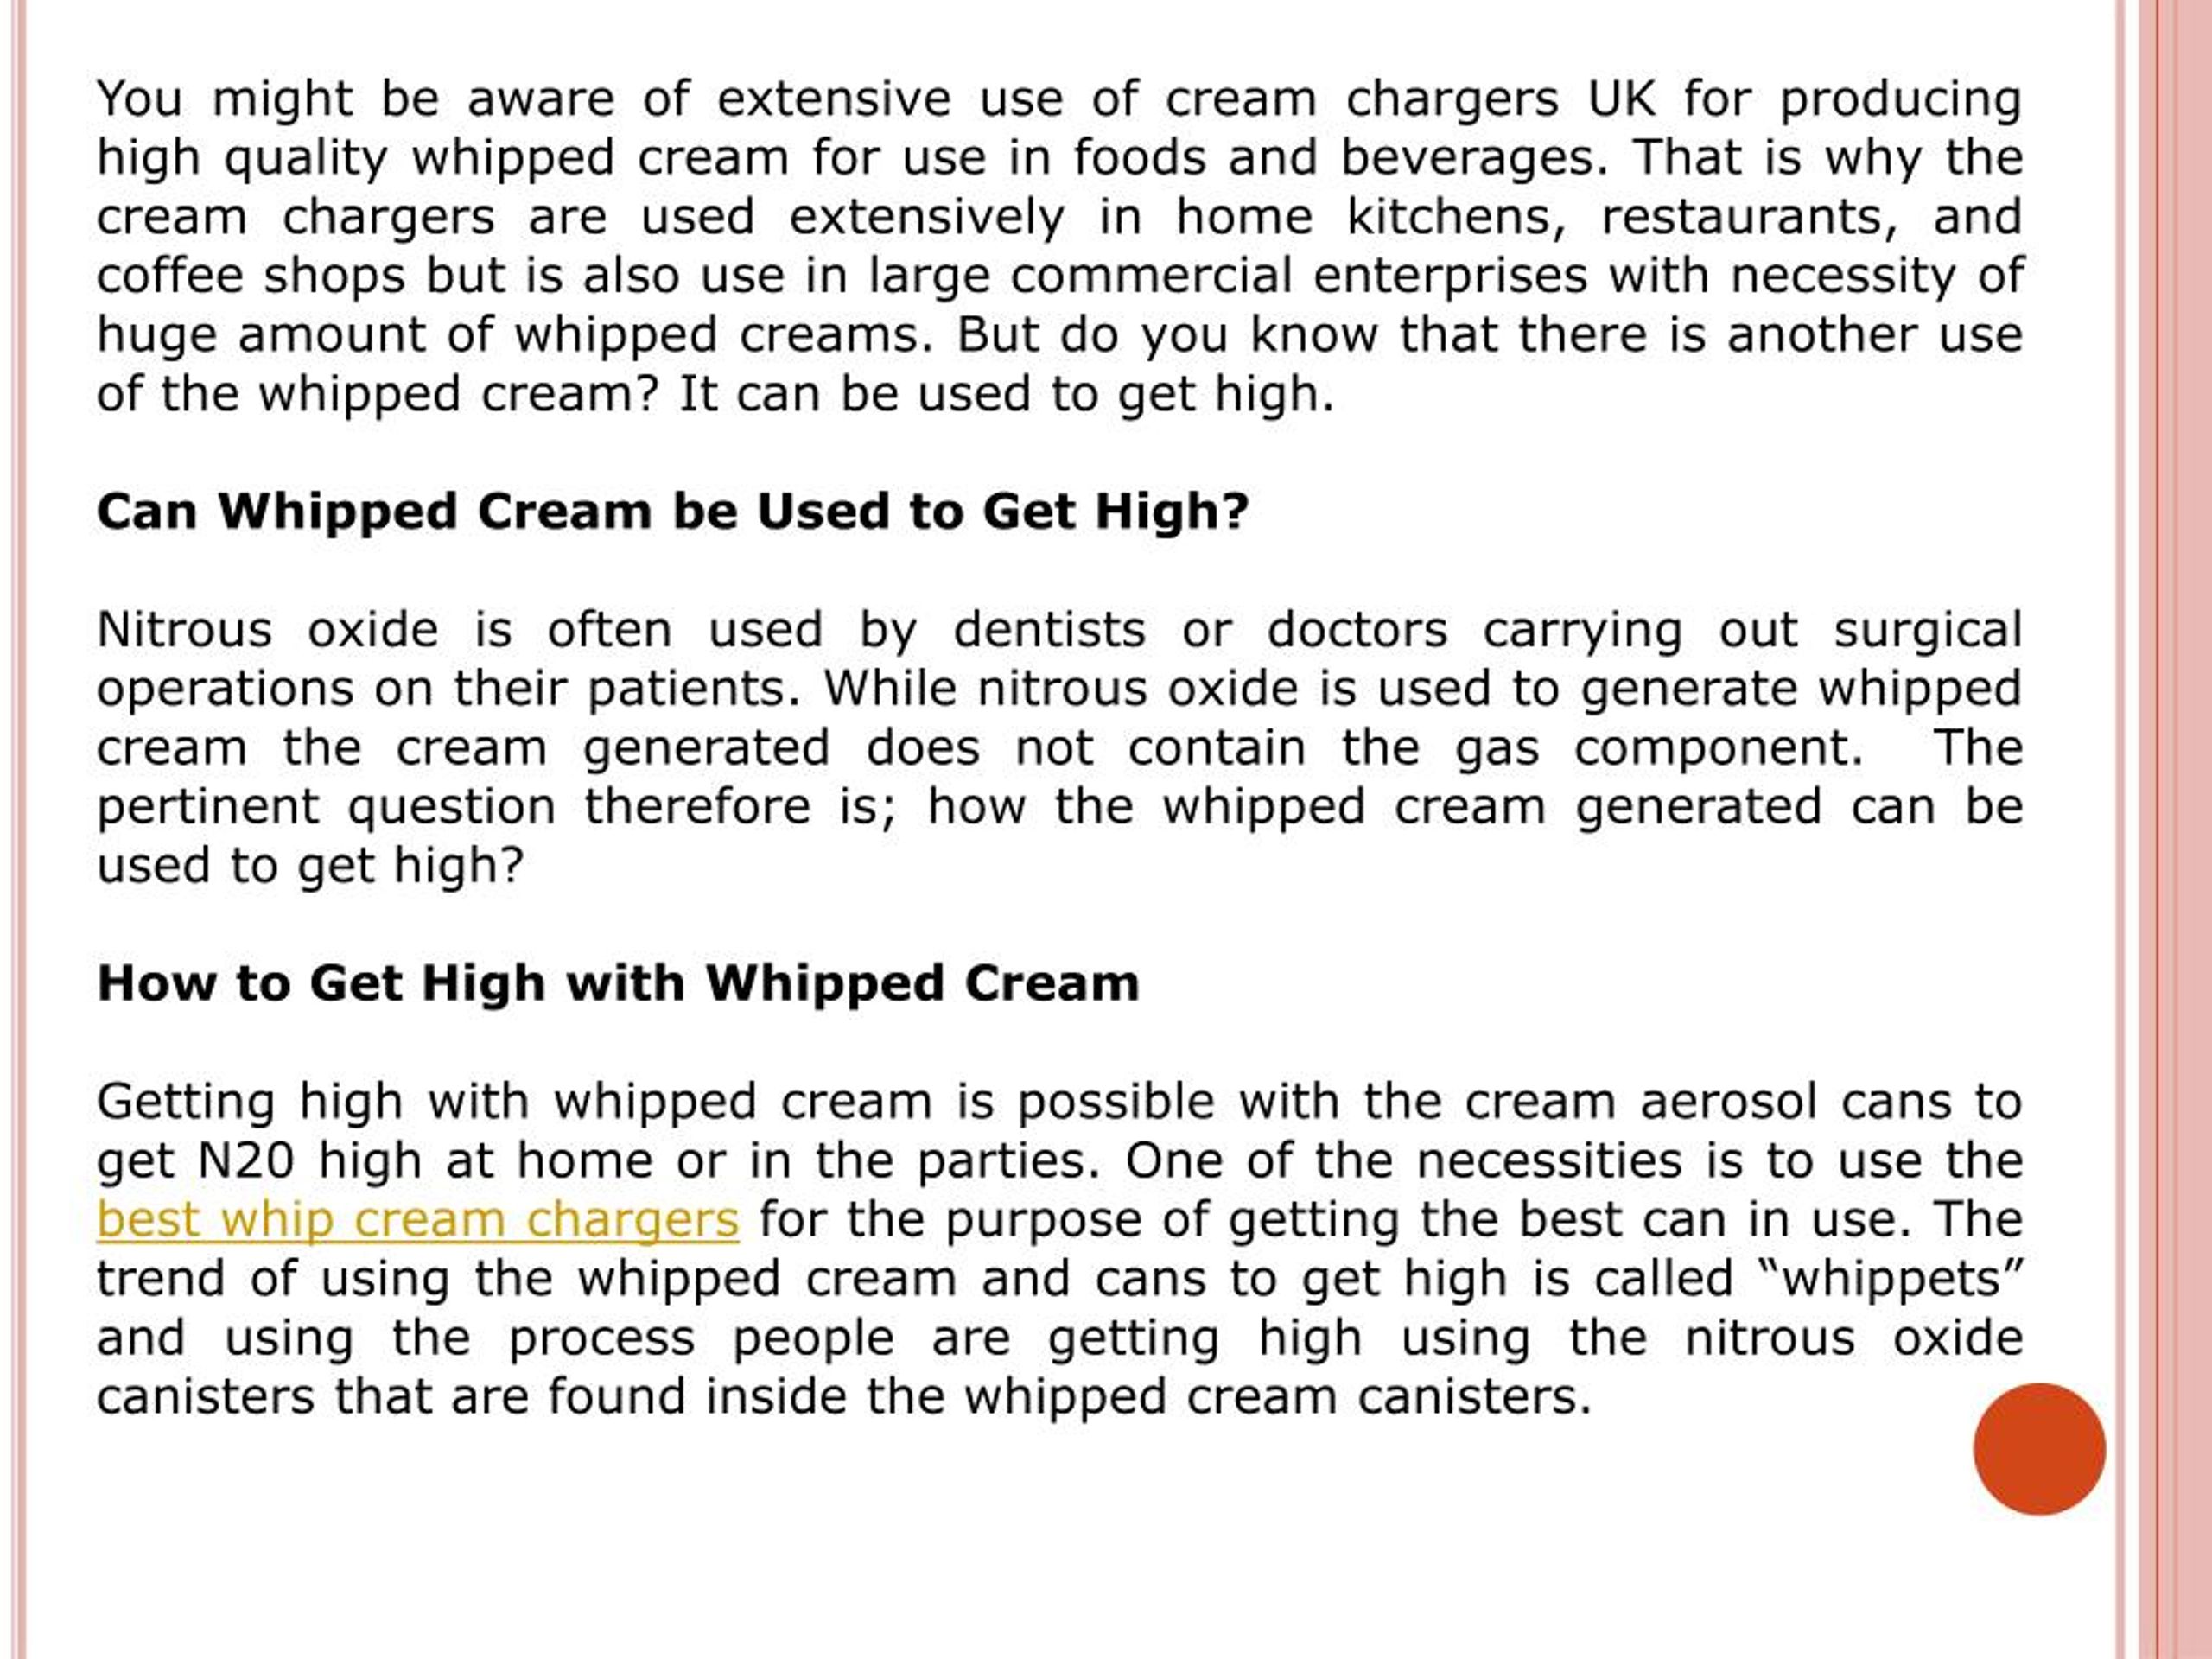 PPT - Best Whip Cream Chargers UK PowerPoint Presentation, free download -  ID:7921786